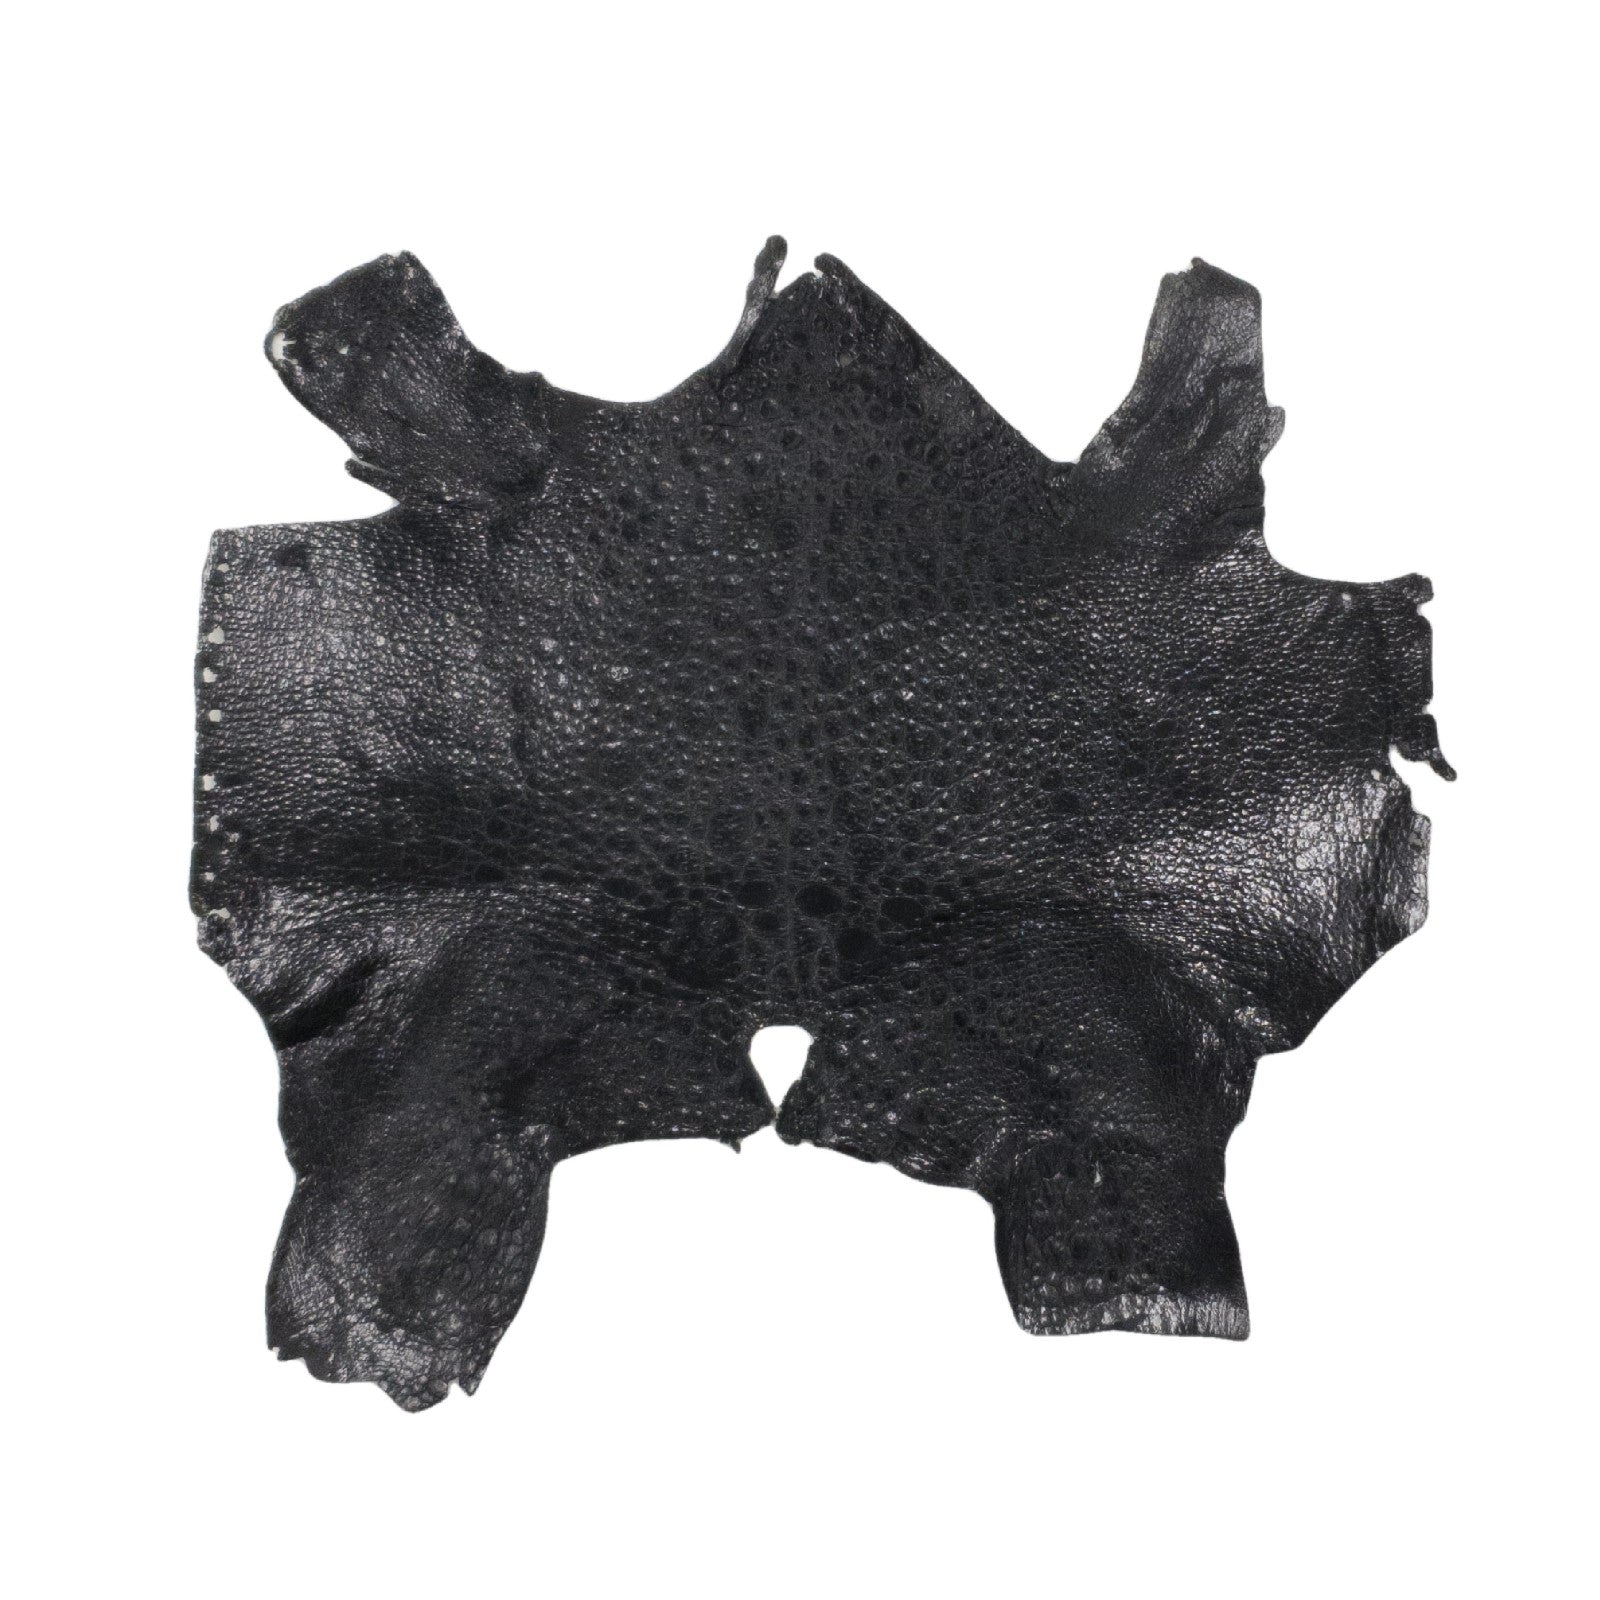 Cane Toads/Frog Skins, 3-4" x 5-6", 1 - 1 1/2 oz, Volcanic Black | The Leather Guy